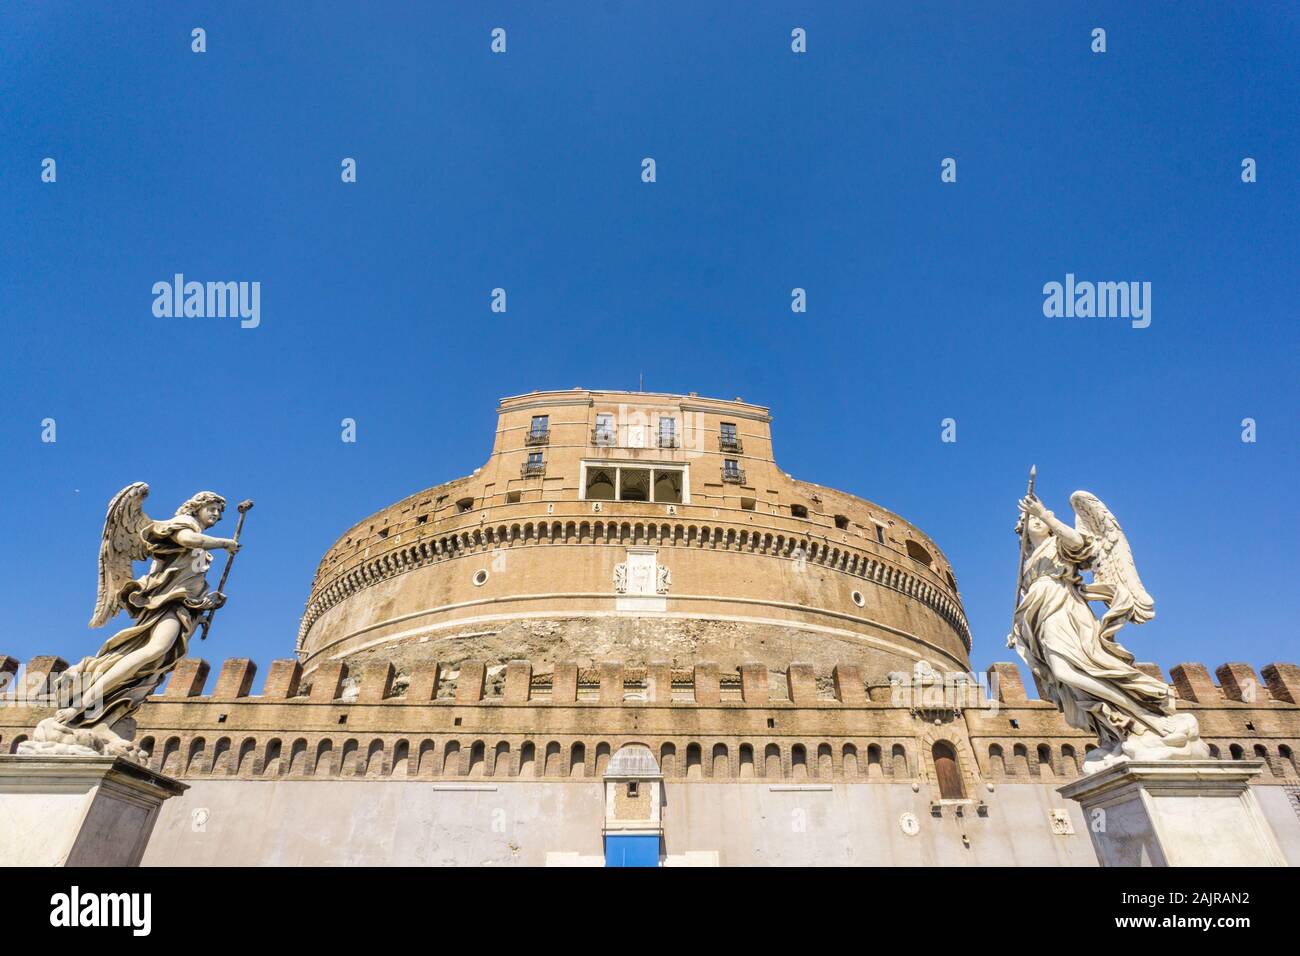 View of 'Castel Sant'Angelo' (Castle of the Holy Angel) Rome, Italy Stock Photo